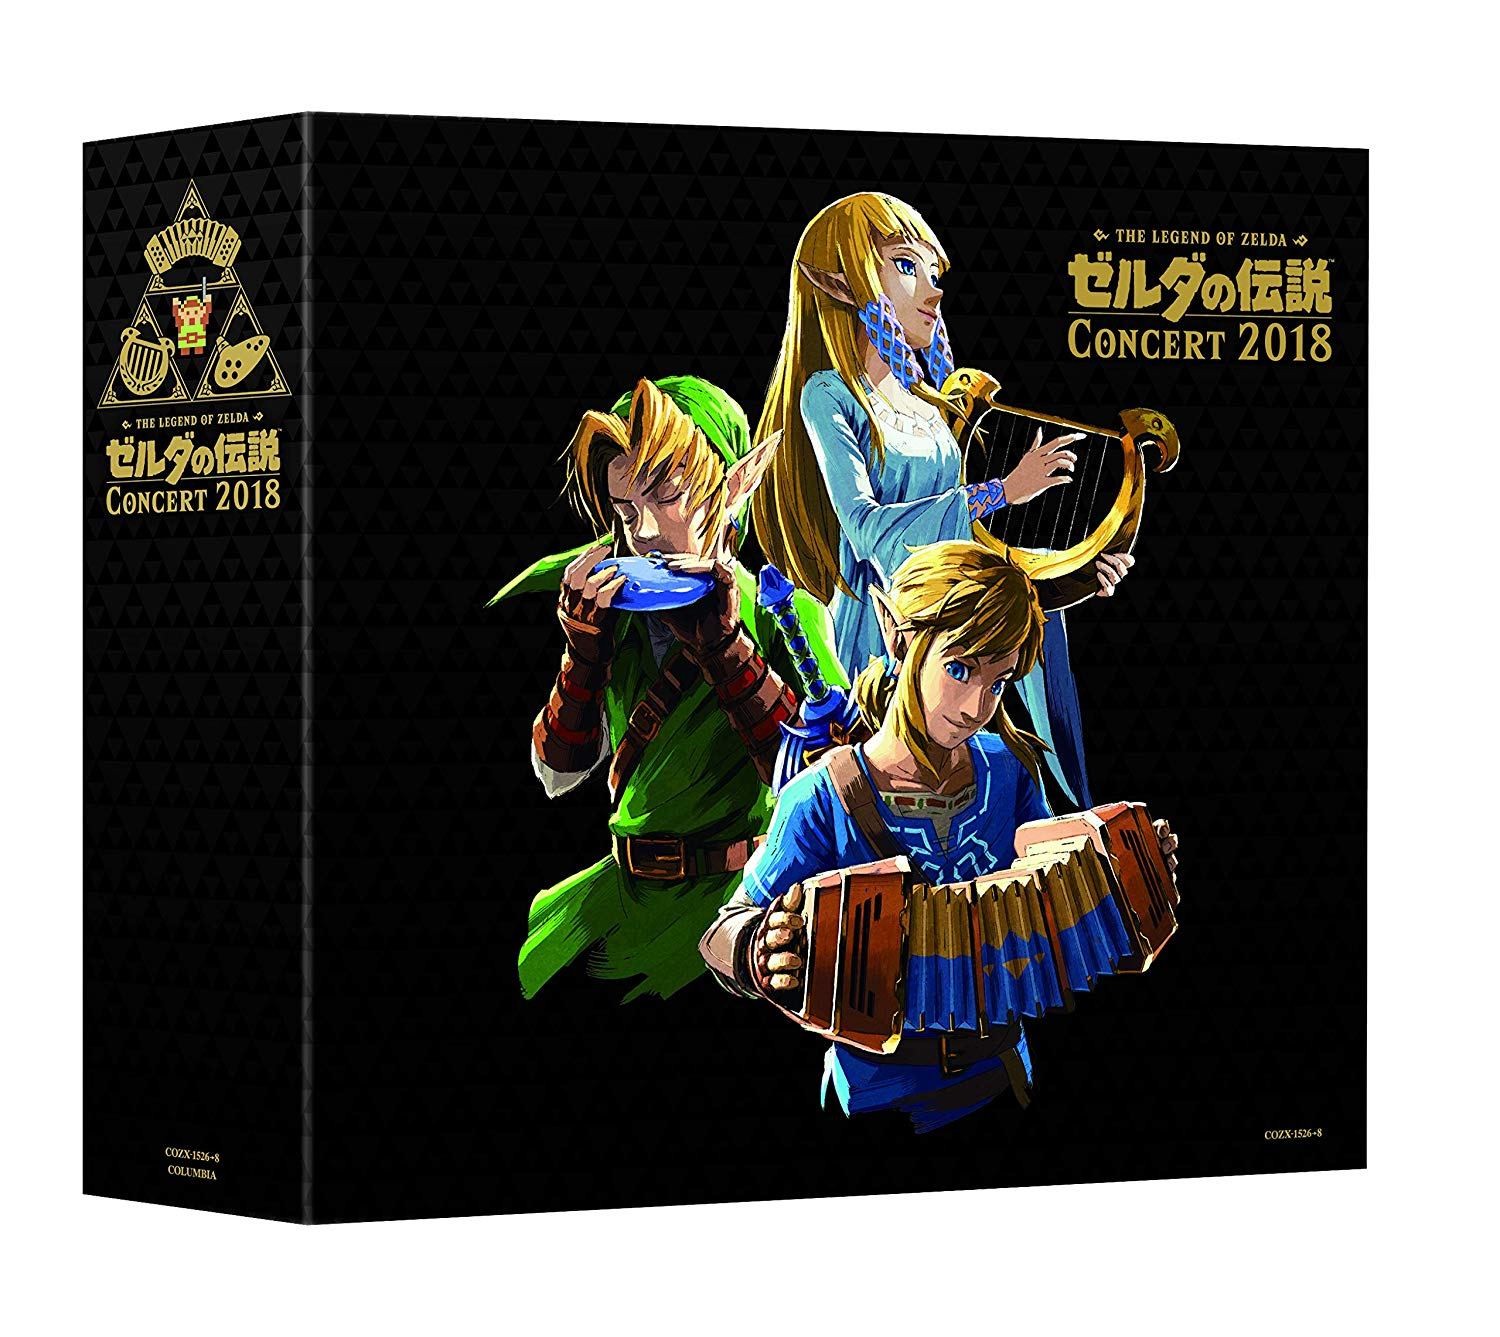 The Legend Of Zelda Concert 2018 [2CD+Blu-ray Limited Edition